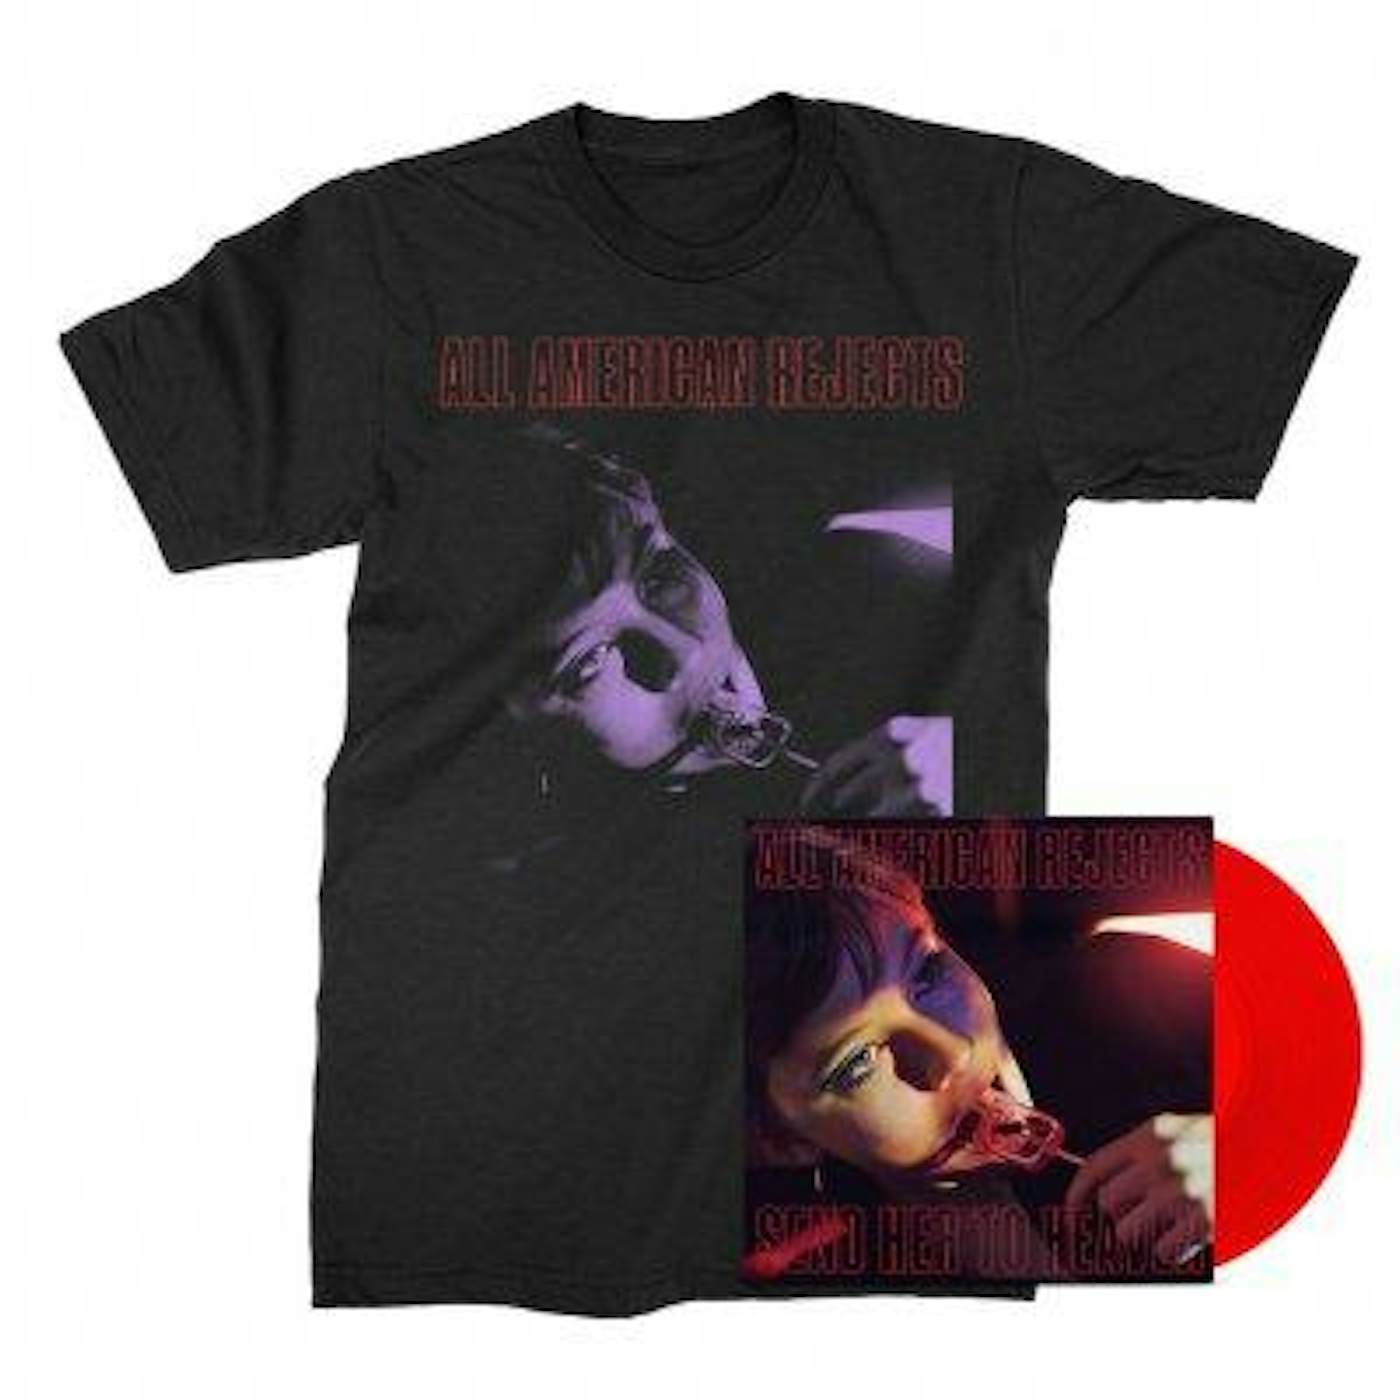 The All-American Rejects Send Her To Heaven 12" (Red) + SHTH Tee (Black) Bundle